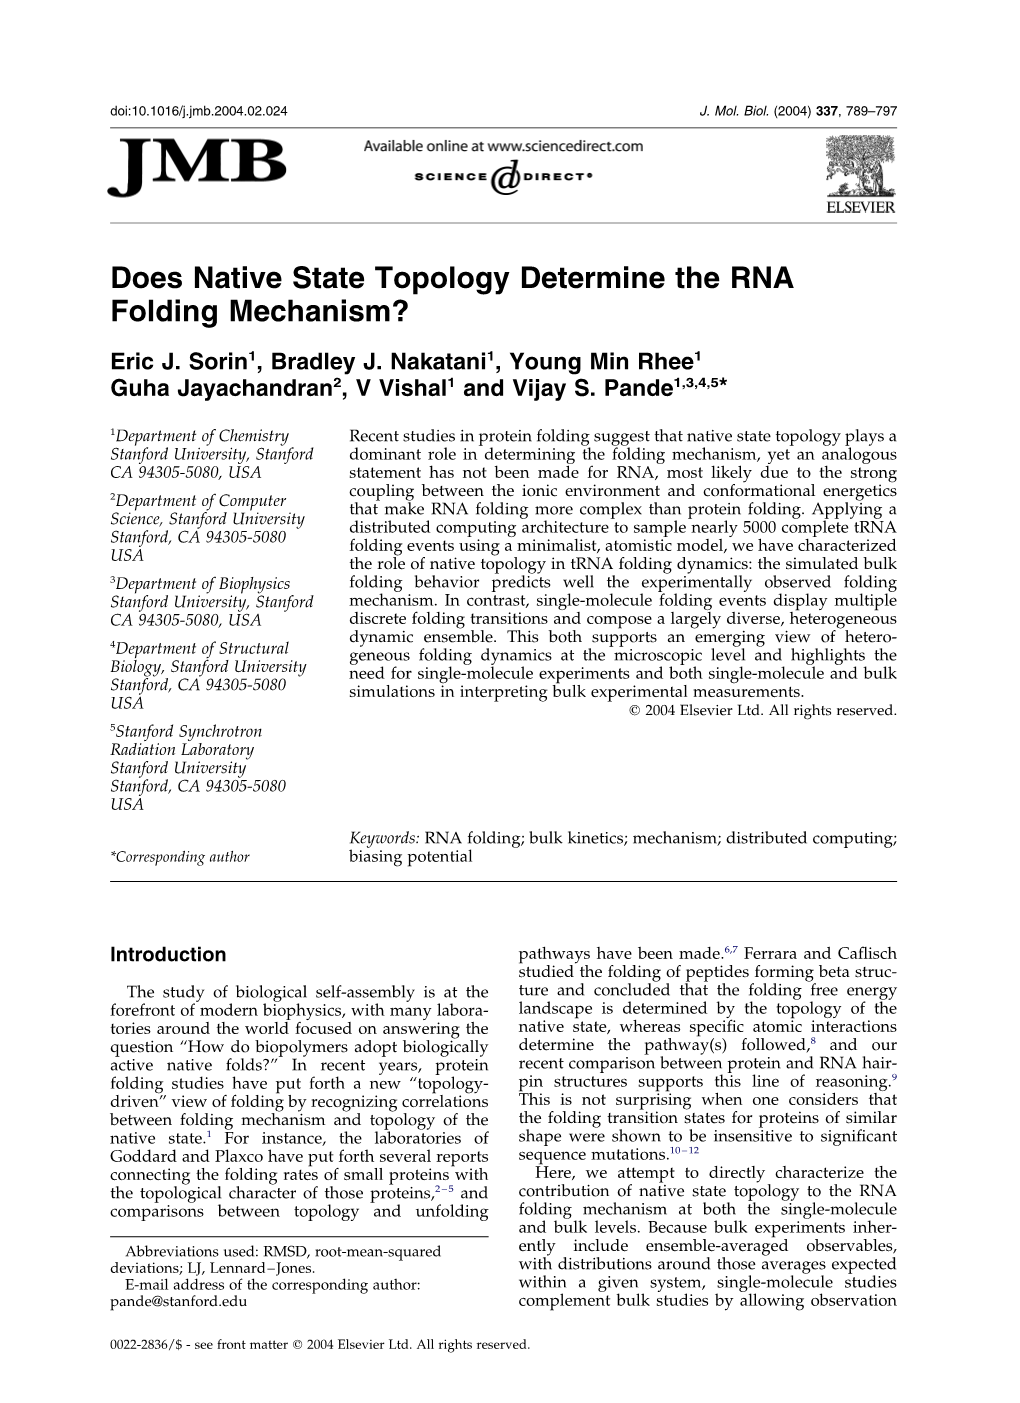 Does Native State Topology Determine the RNA Folding Mechanism?